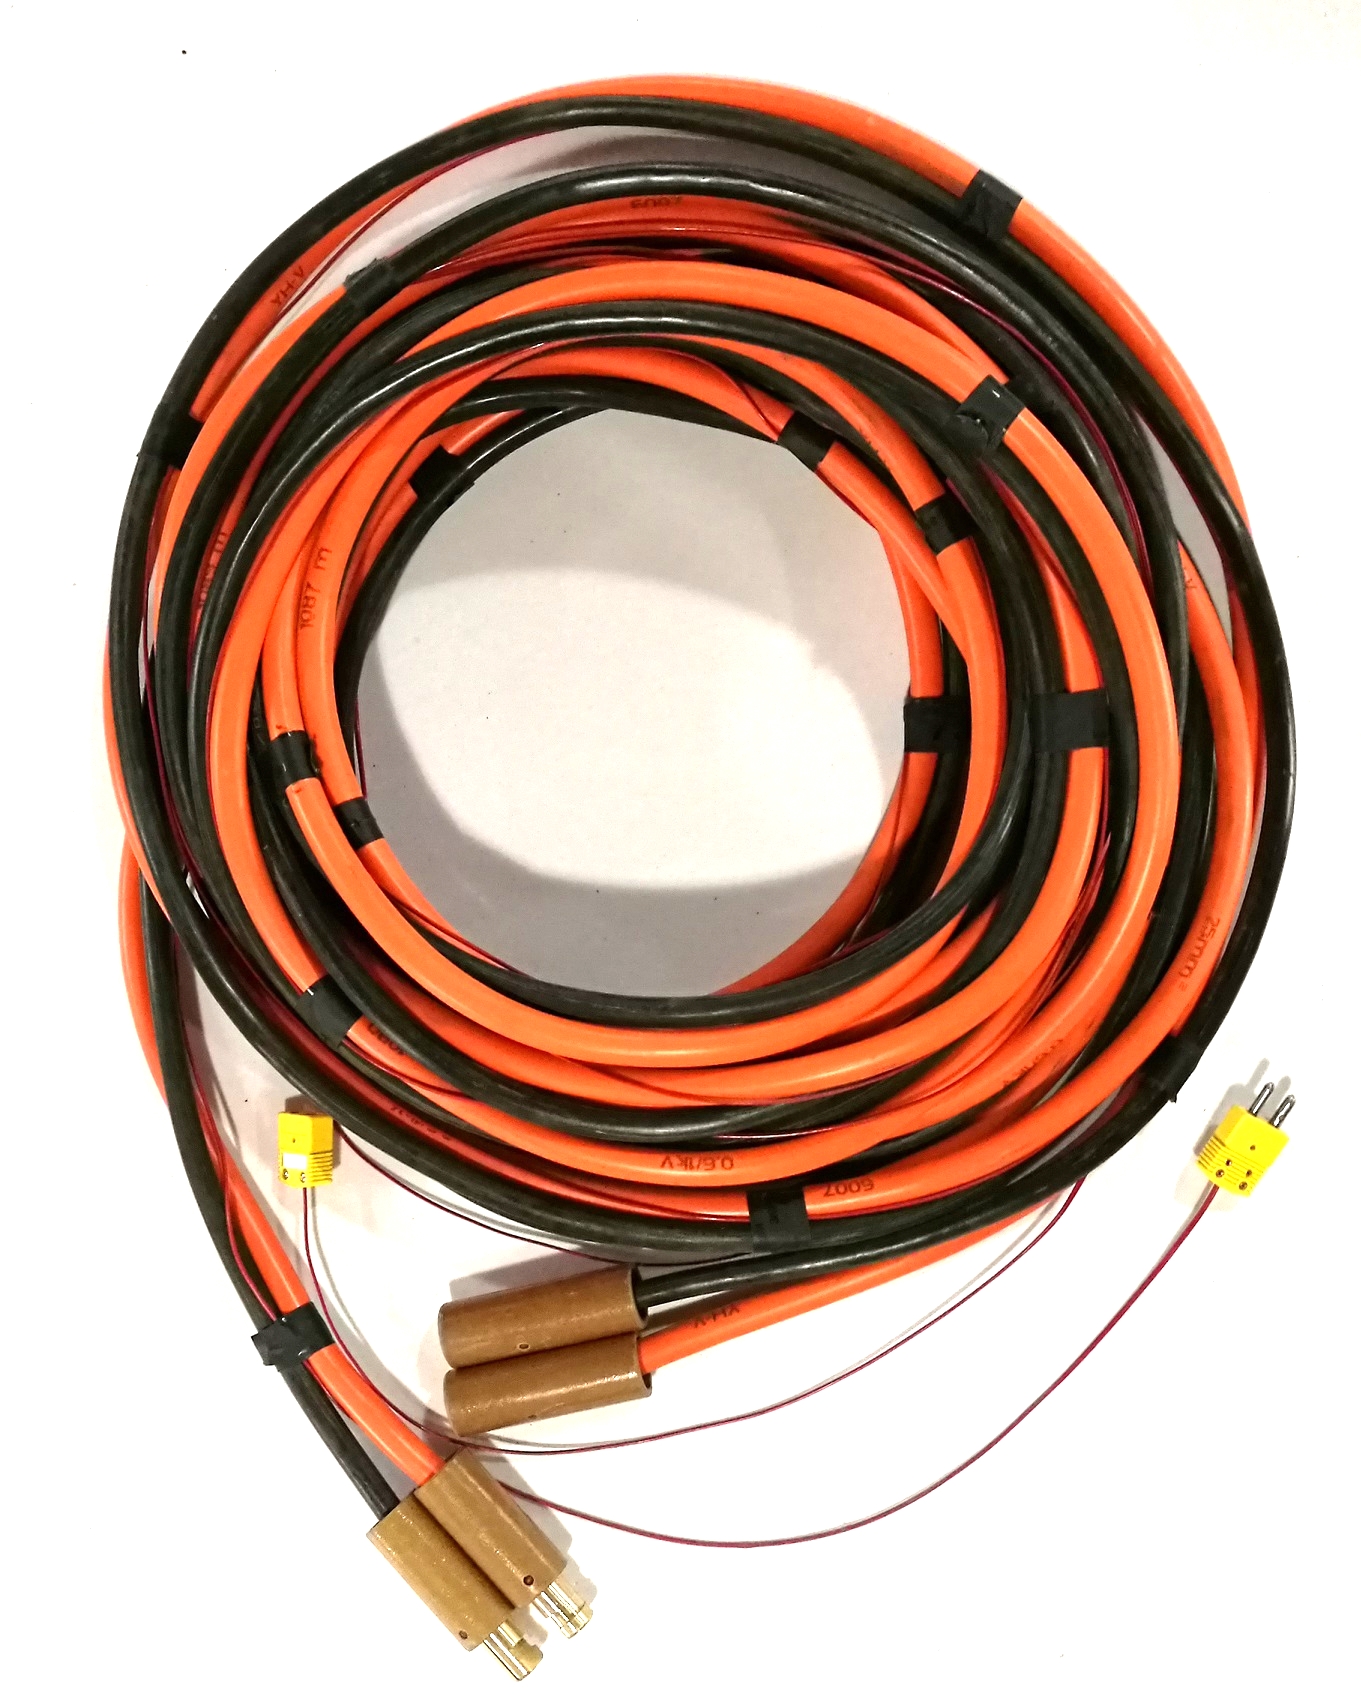 cable set for PWHT.jpg